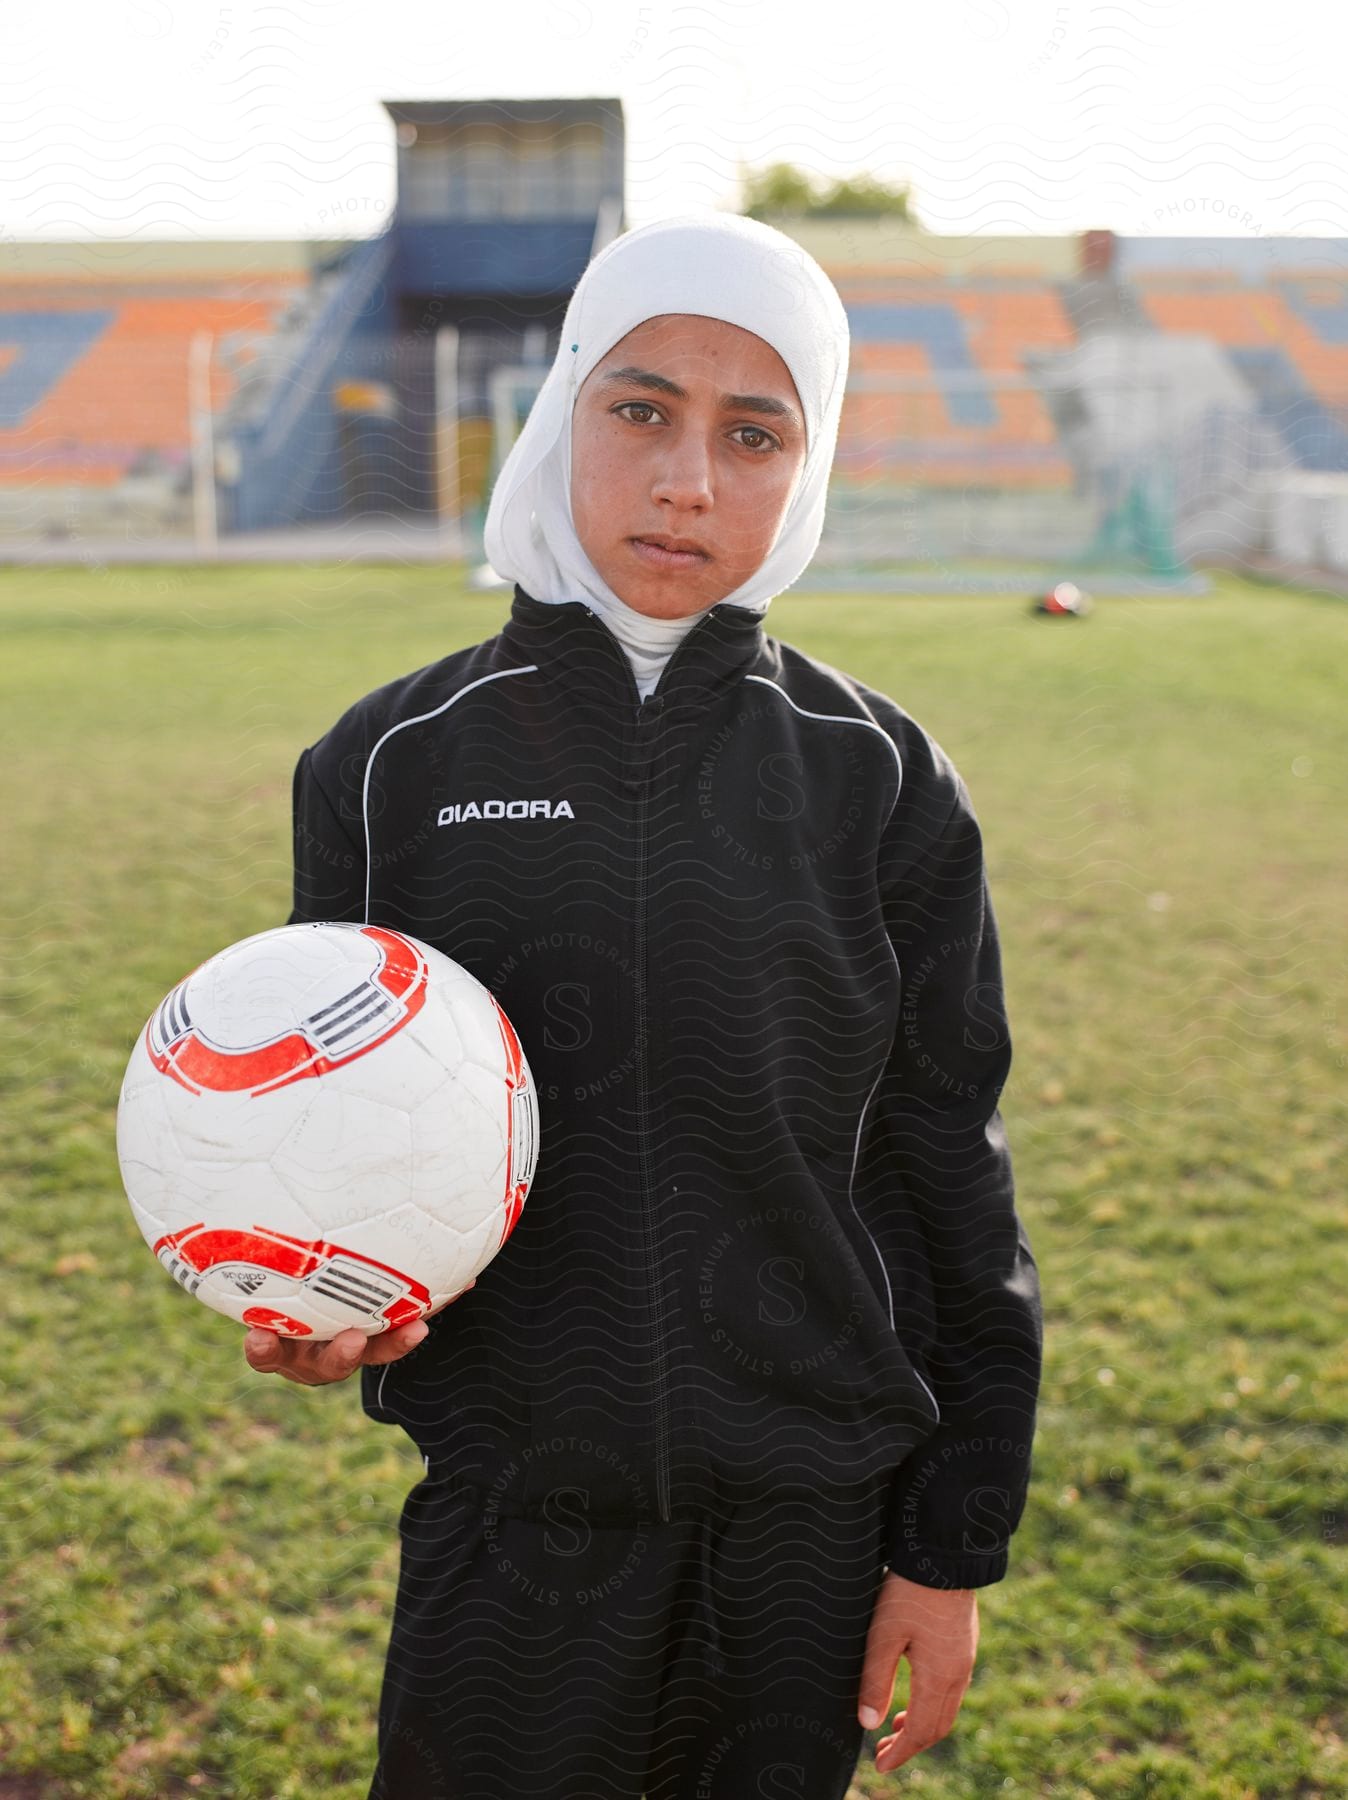 A woman wearing a headscarf holds a soccer ball on a soccer field